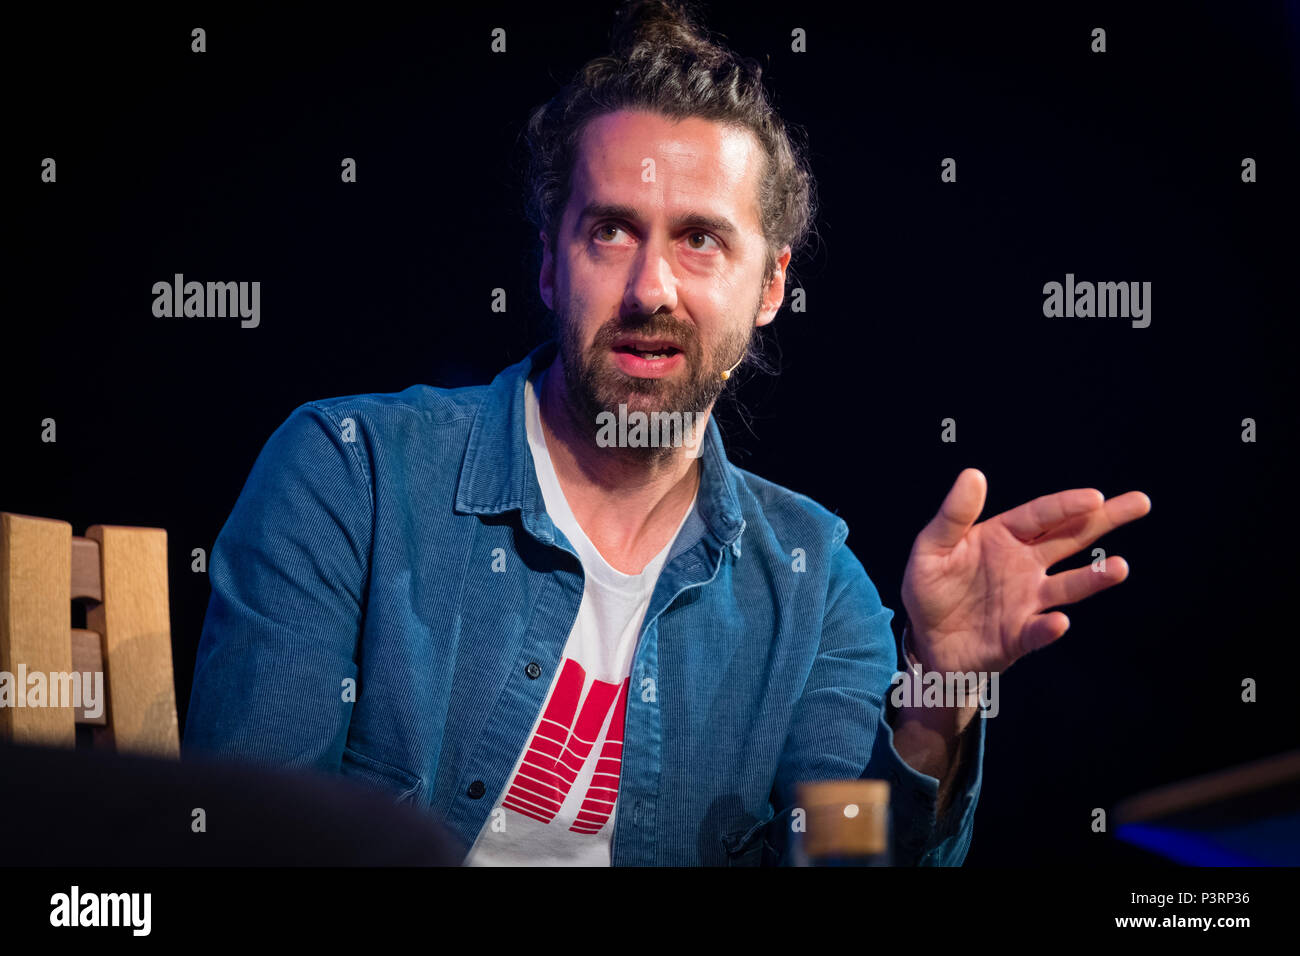 Jamie Bartlett , author of 'The People vs Tech' and  'The Dark Net' ,  tech blogger for The Spectator and Director of the Centre for the Analysis of Social Media, appearing  at the 2018 Hay Festival of Literature and the Arts.  This festival , famously described  by former US President Bill Clinton  as 'the Woodstock of the Mind', attracts  writers and thinkers from across the globe for 10 days of celebrations of the best of the written word Stock Photo